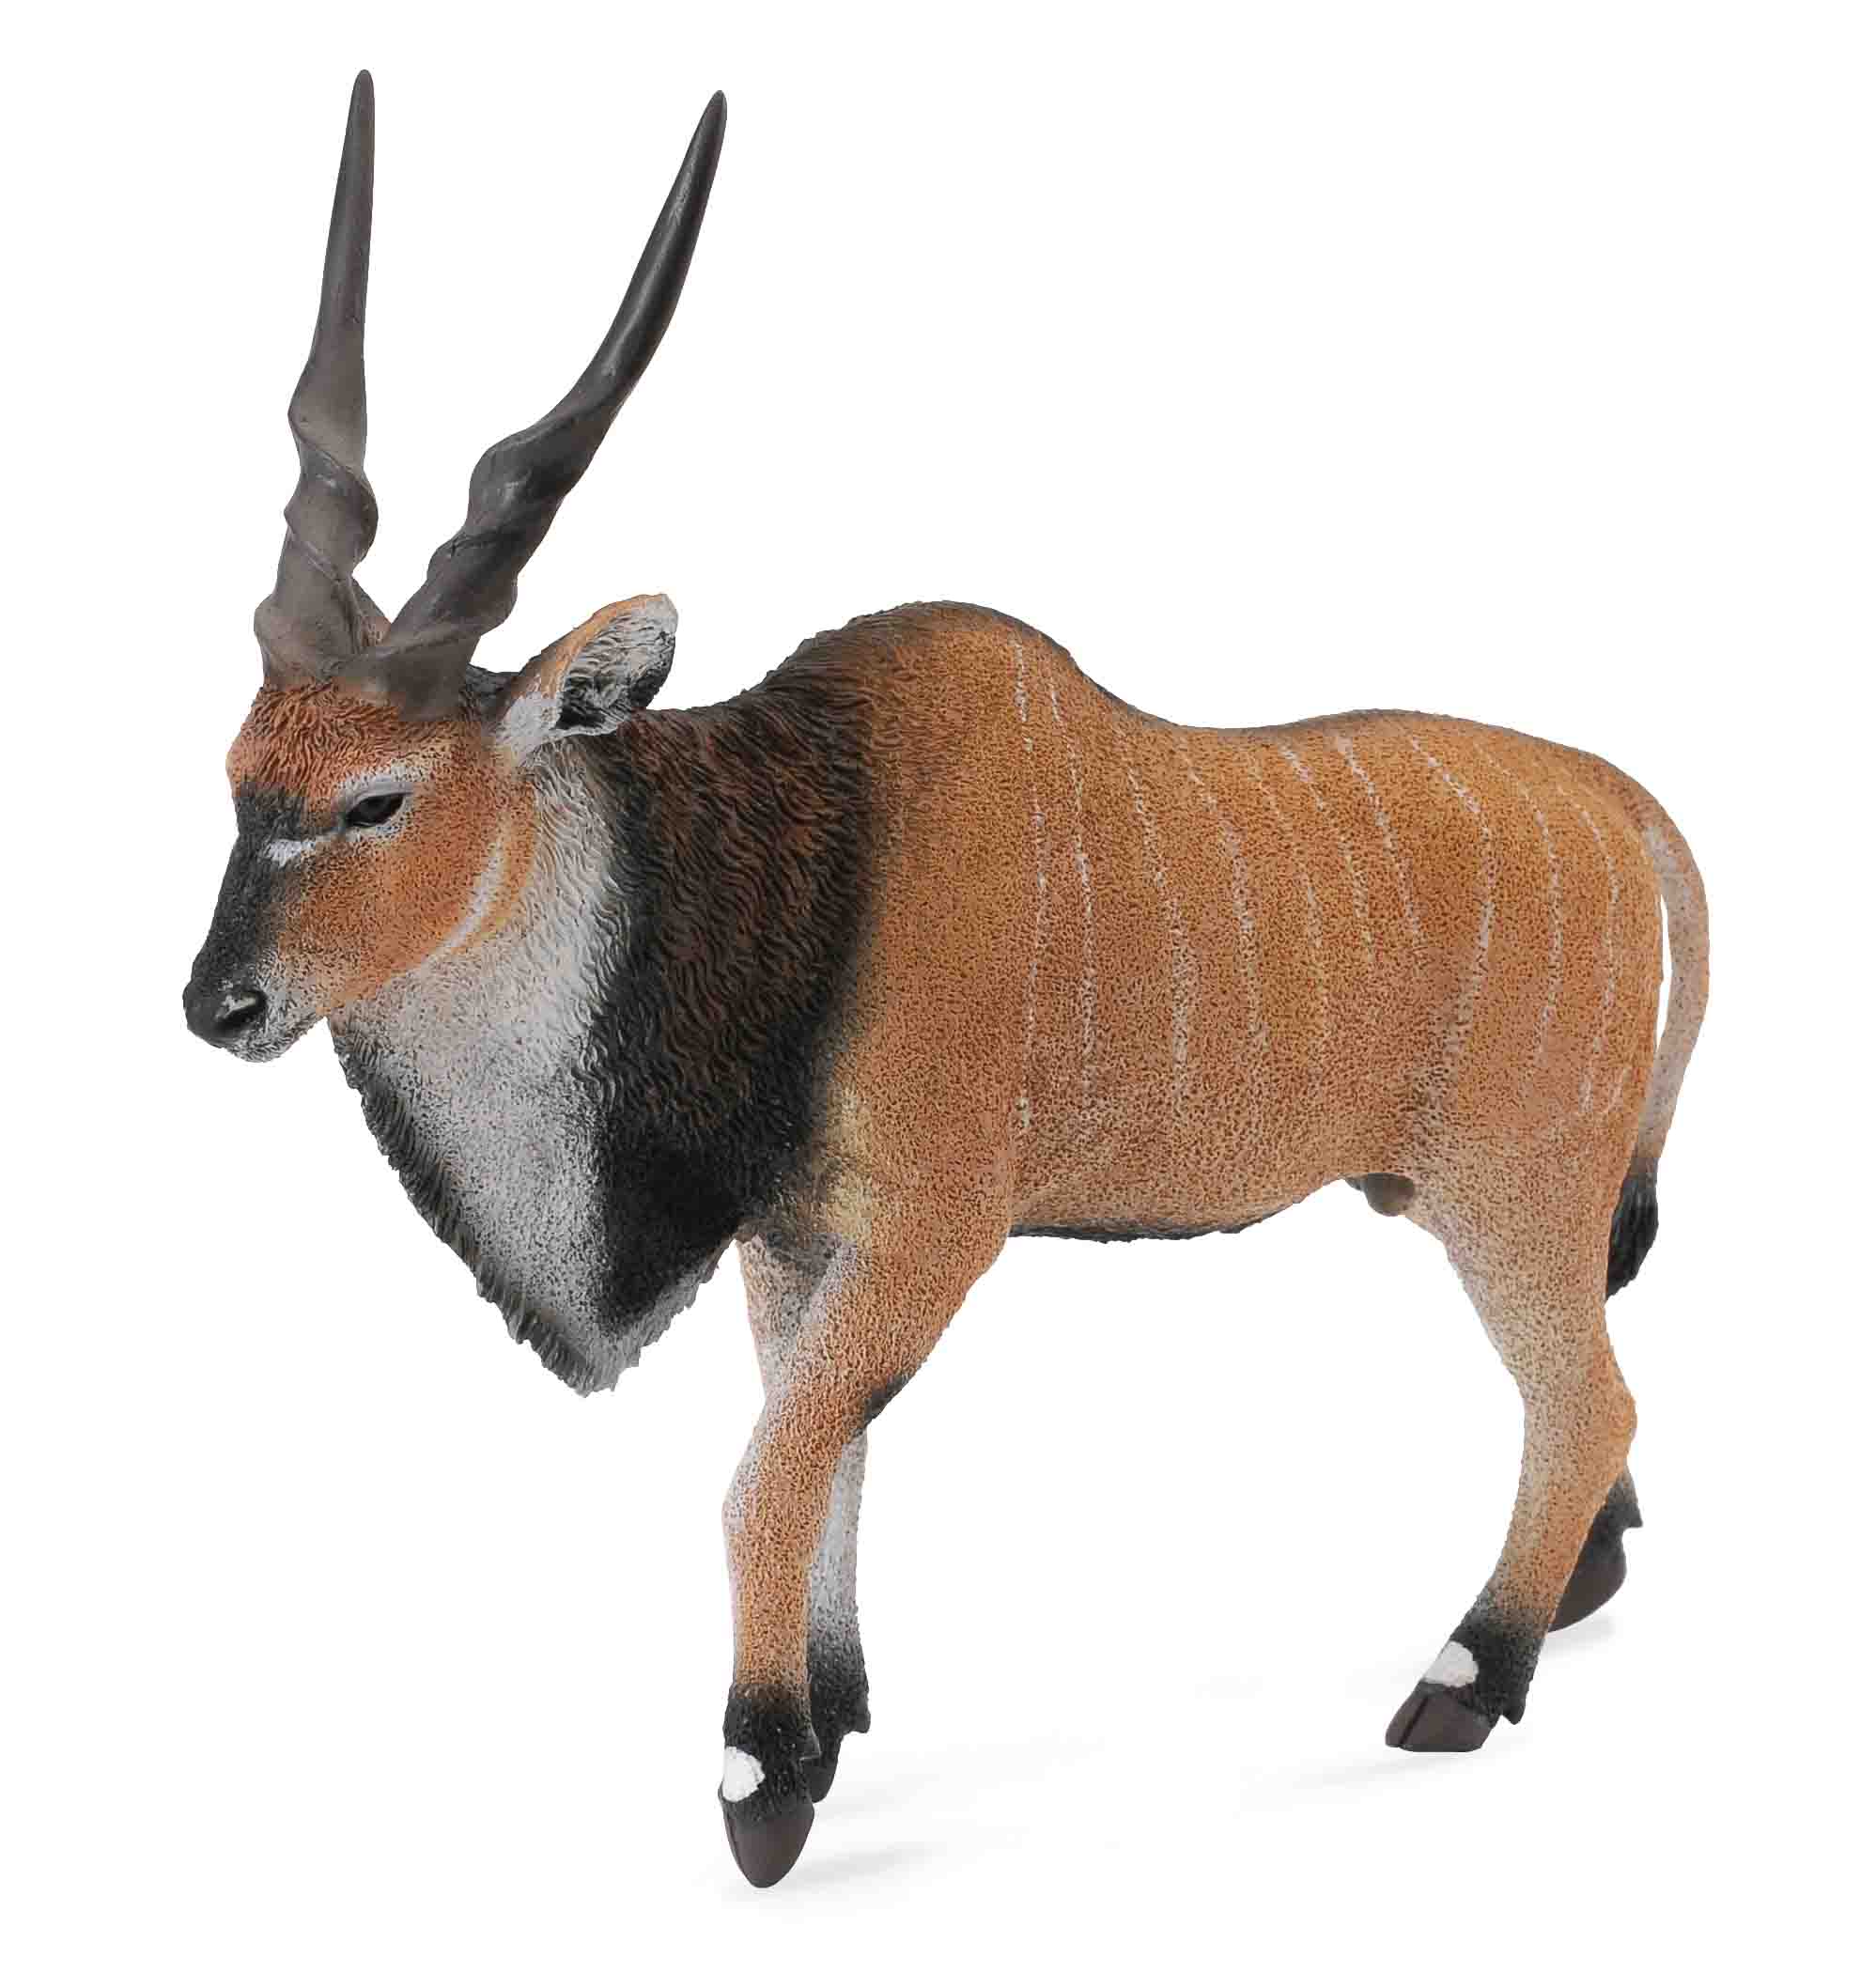 Giant Eland Antelope - Collecta Figures: Animal Toys, Dinosaurs, Farm,  Wild, Sea, Insect, Horses, Prehistoric, Woodlands, Dogs, Cats, Animal  Replica